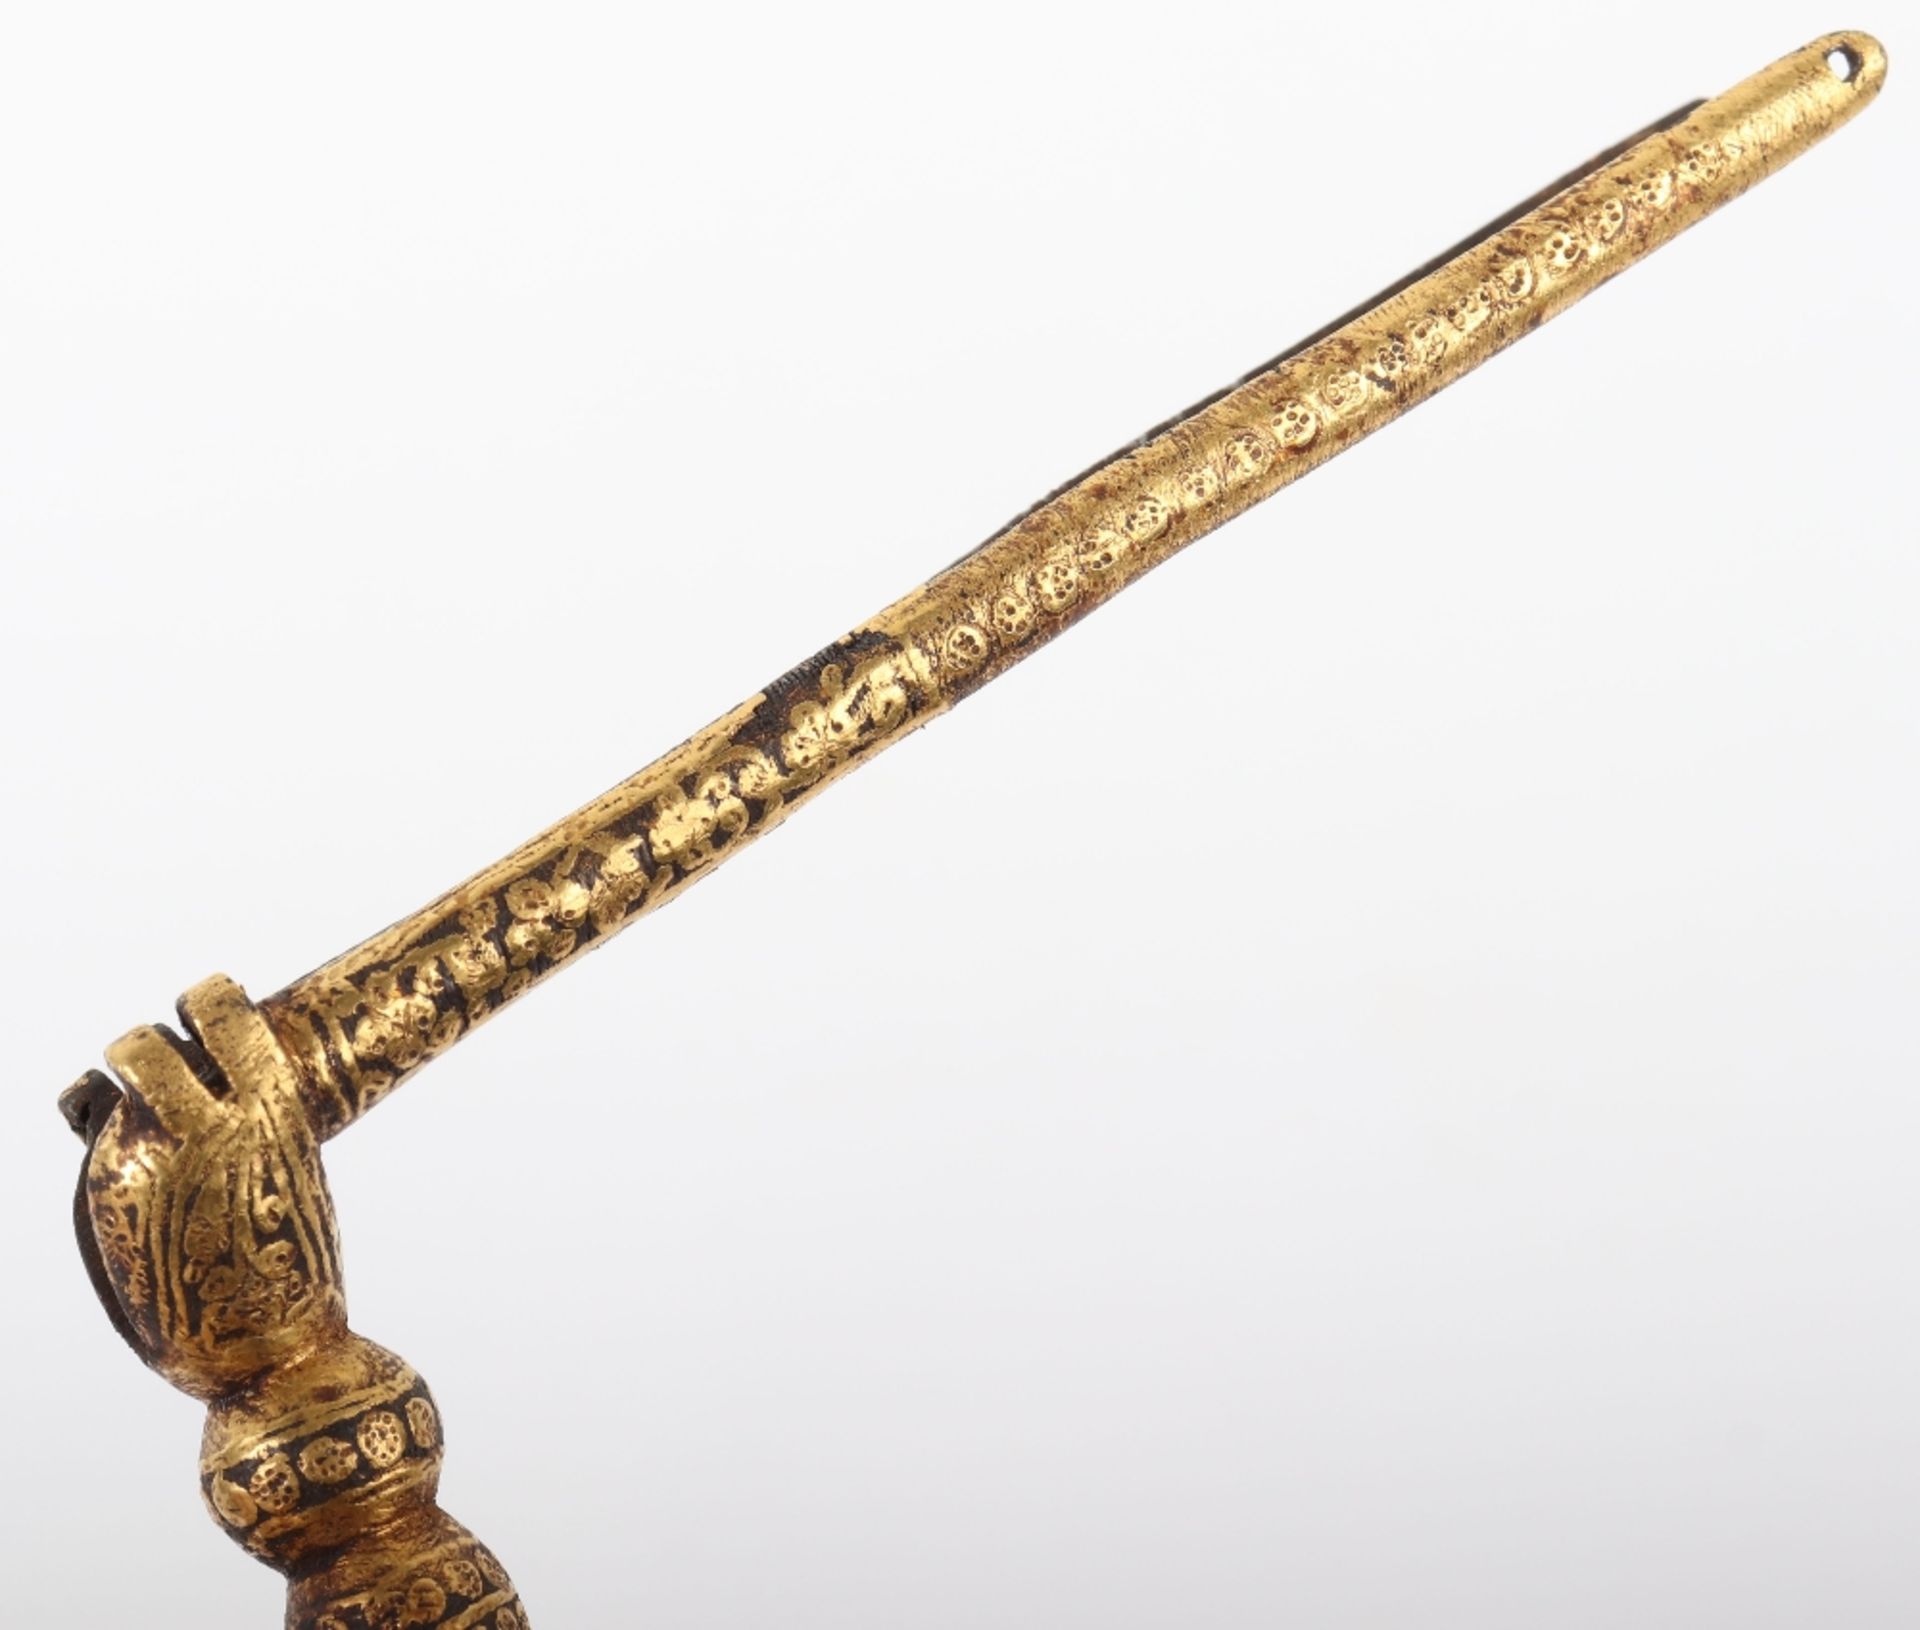 Rare Indian Bayonet Sangin Intended to be Bound to a Matchlock Gun Torador, 18th or 19th Century - Image 8 of 16